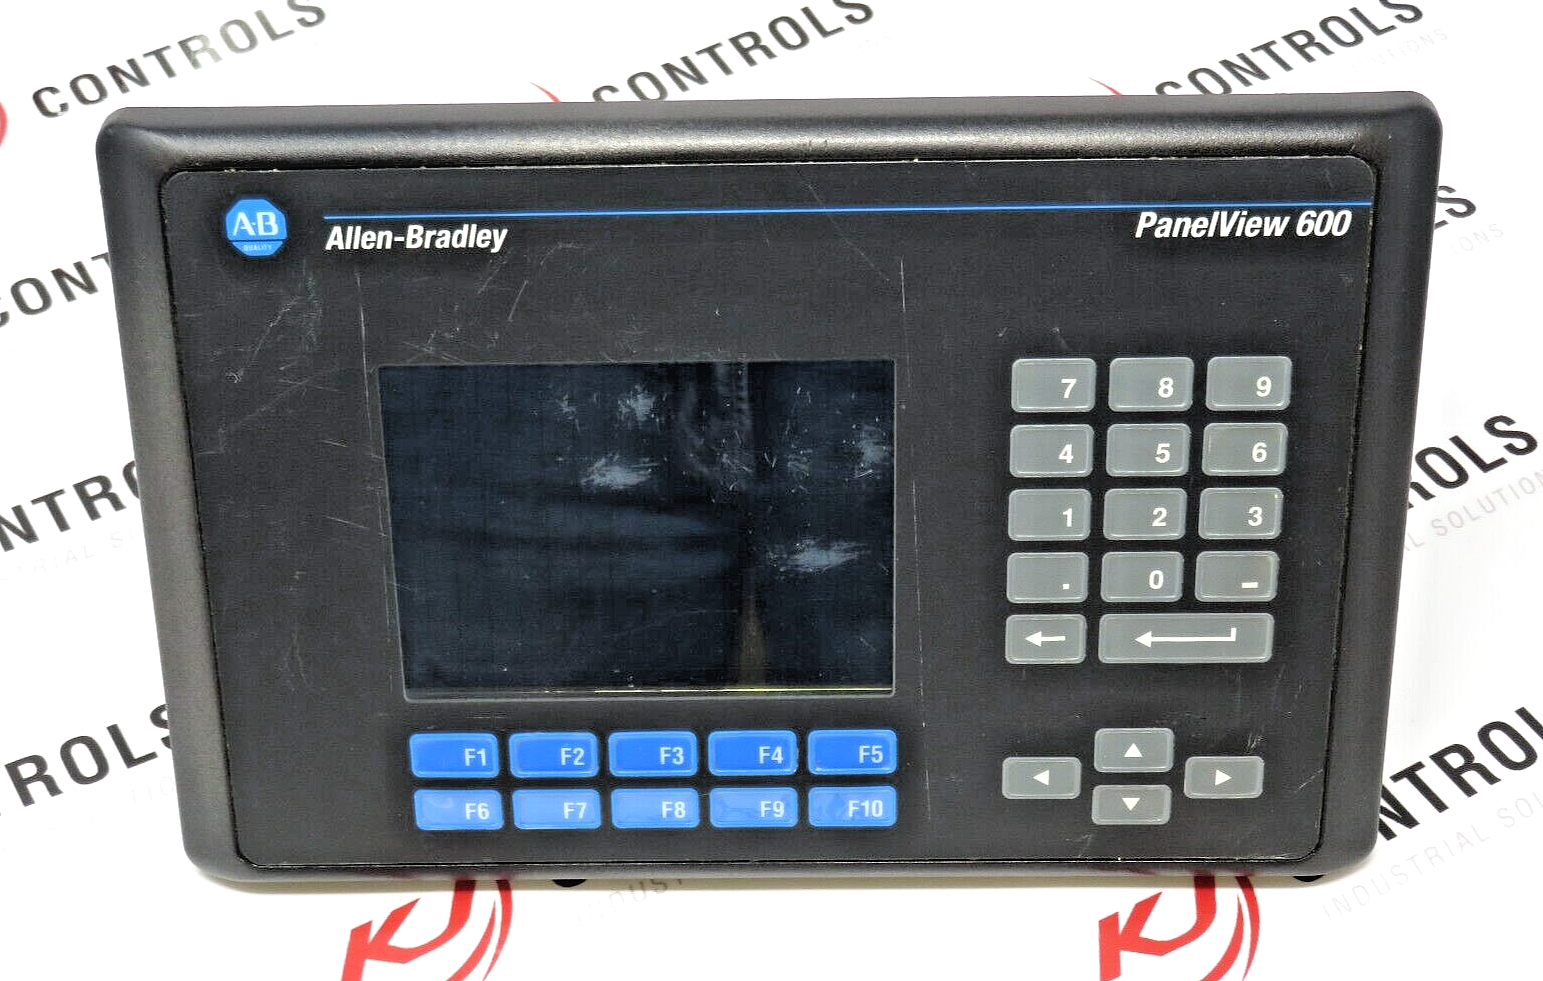 Allen-Bradley 2711-B6C8 PanelView 600 Color 6.0" Operator Touch Display Module